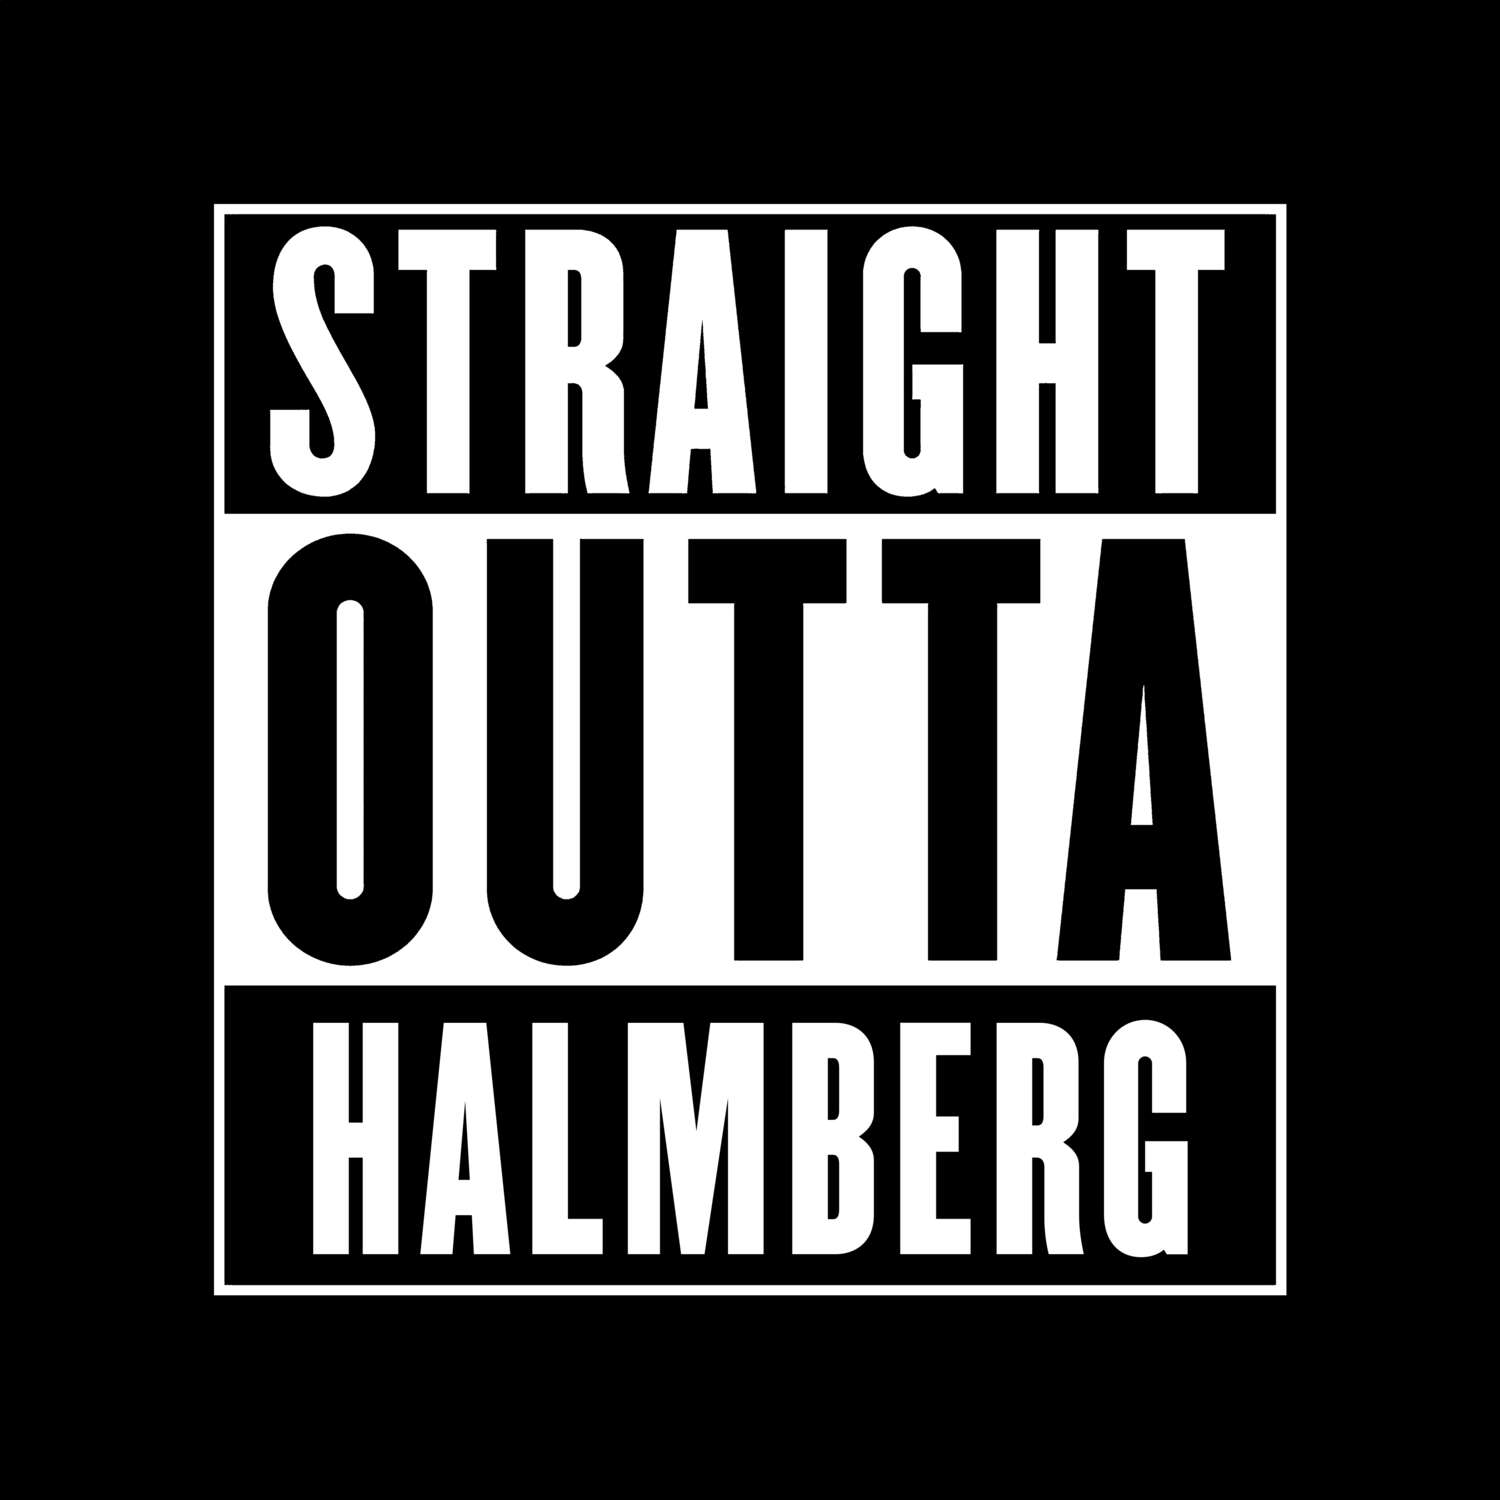 Halmberg T-Shirt »Straight Outta«